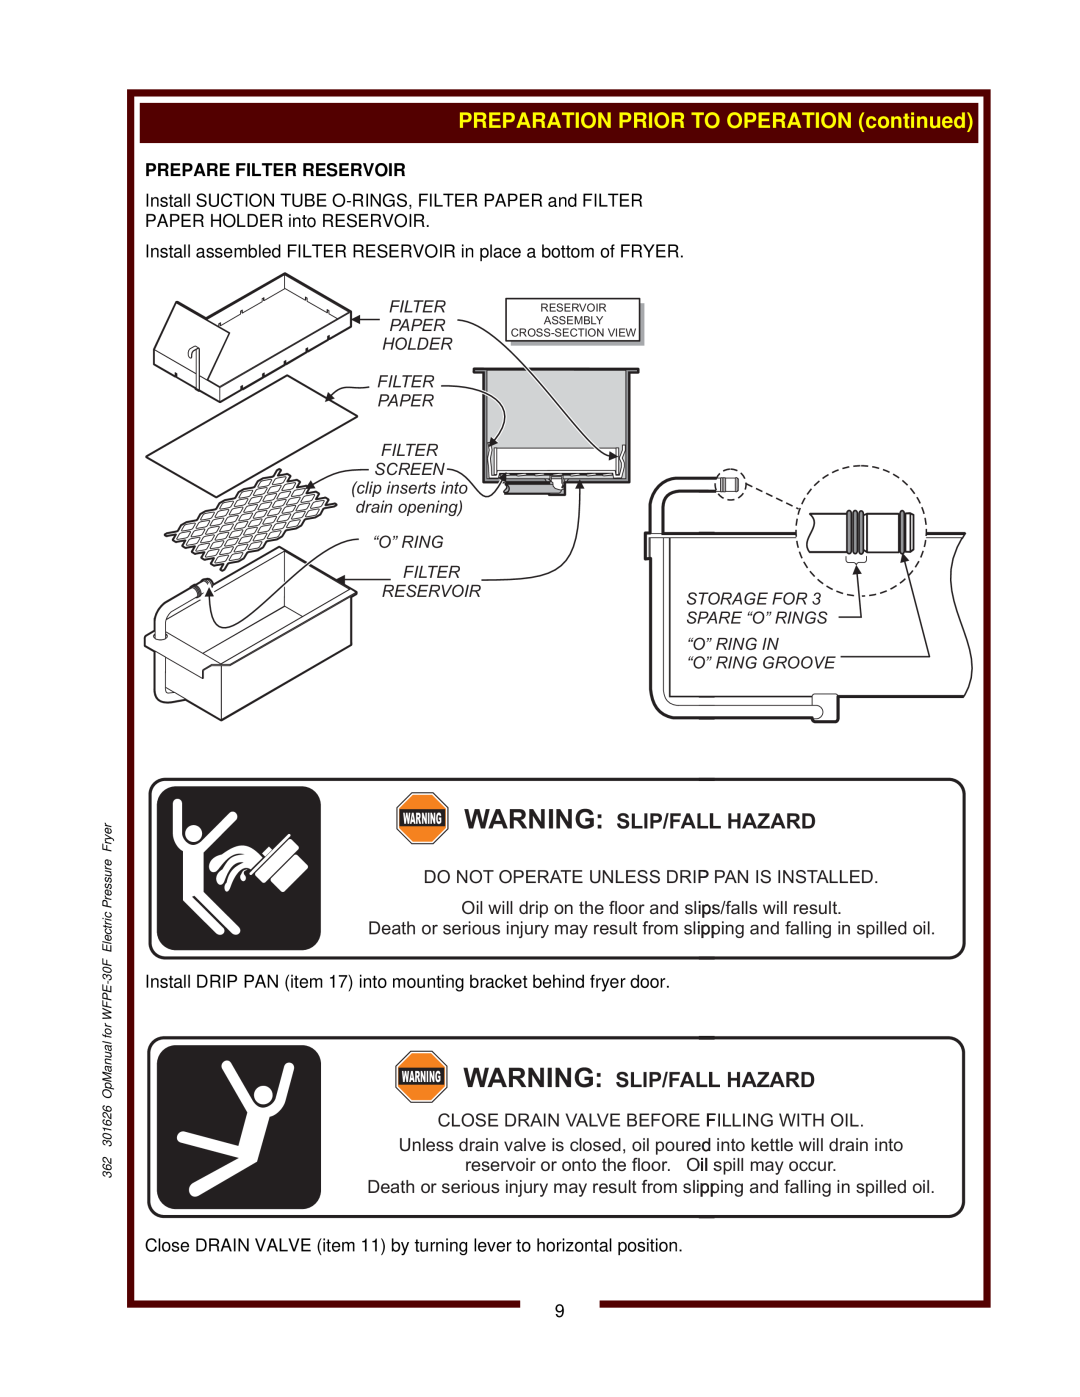 Wells WFPE-30F operation manual Warning Warning Slip/Fall Hazard, Do Not Operate Unless Drip Pan Is Installed 